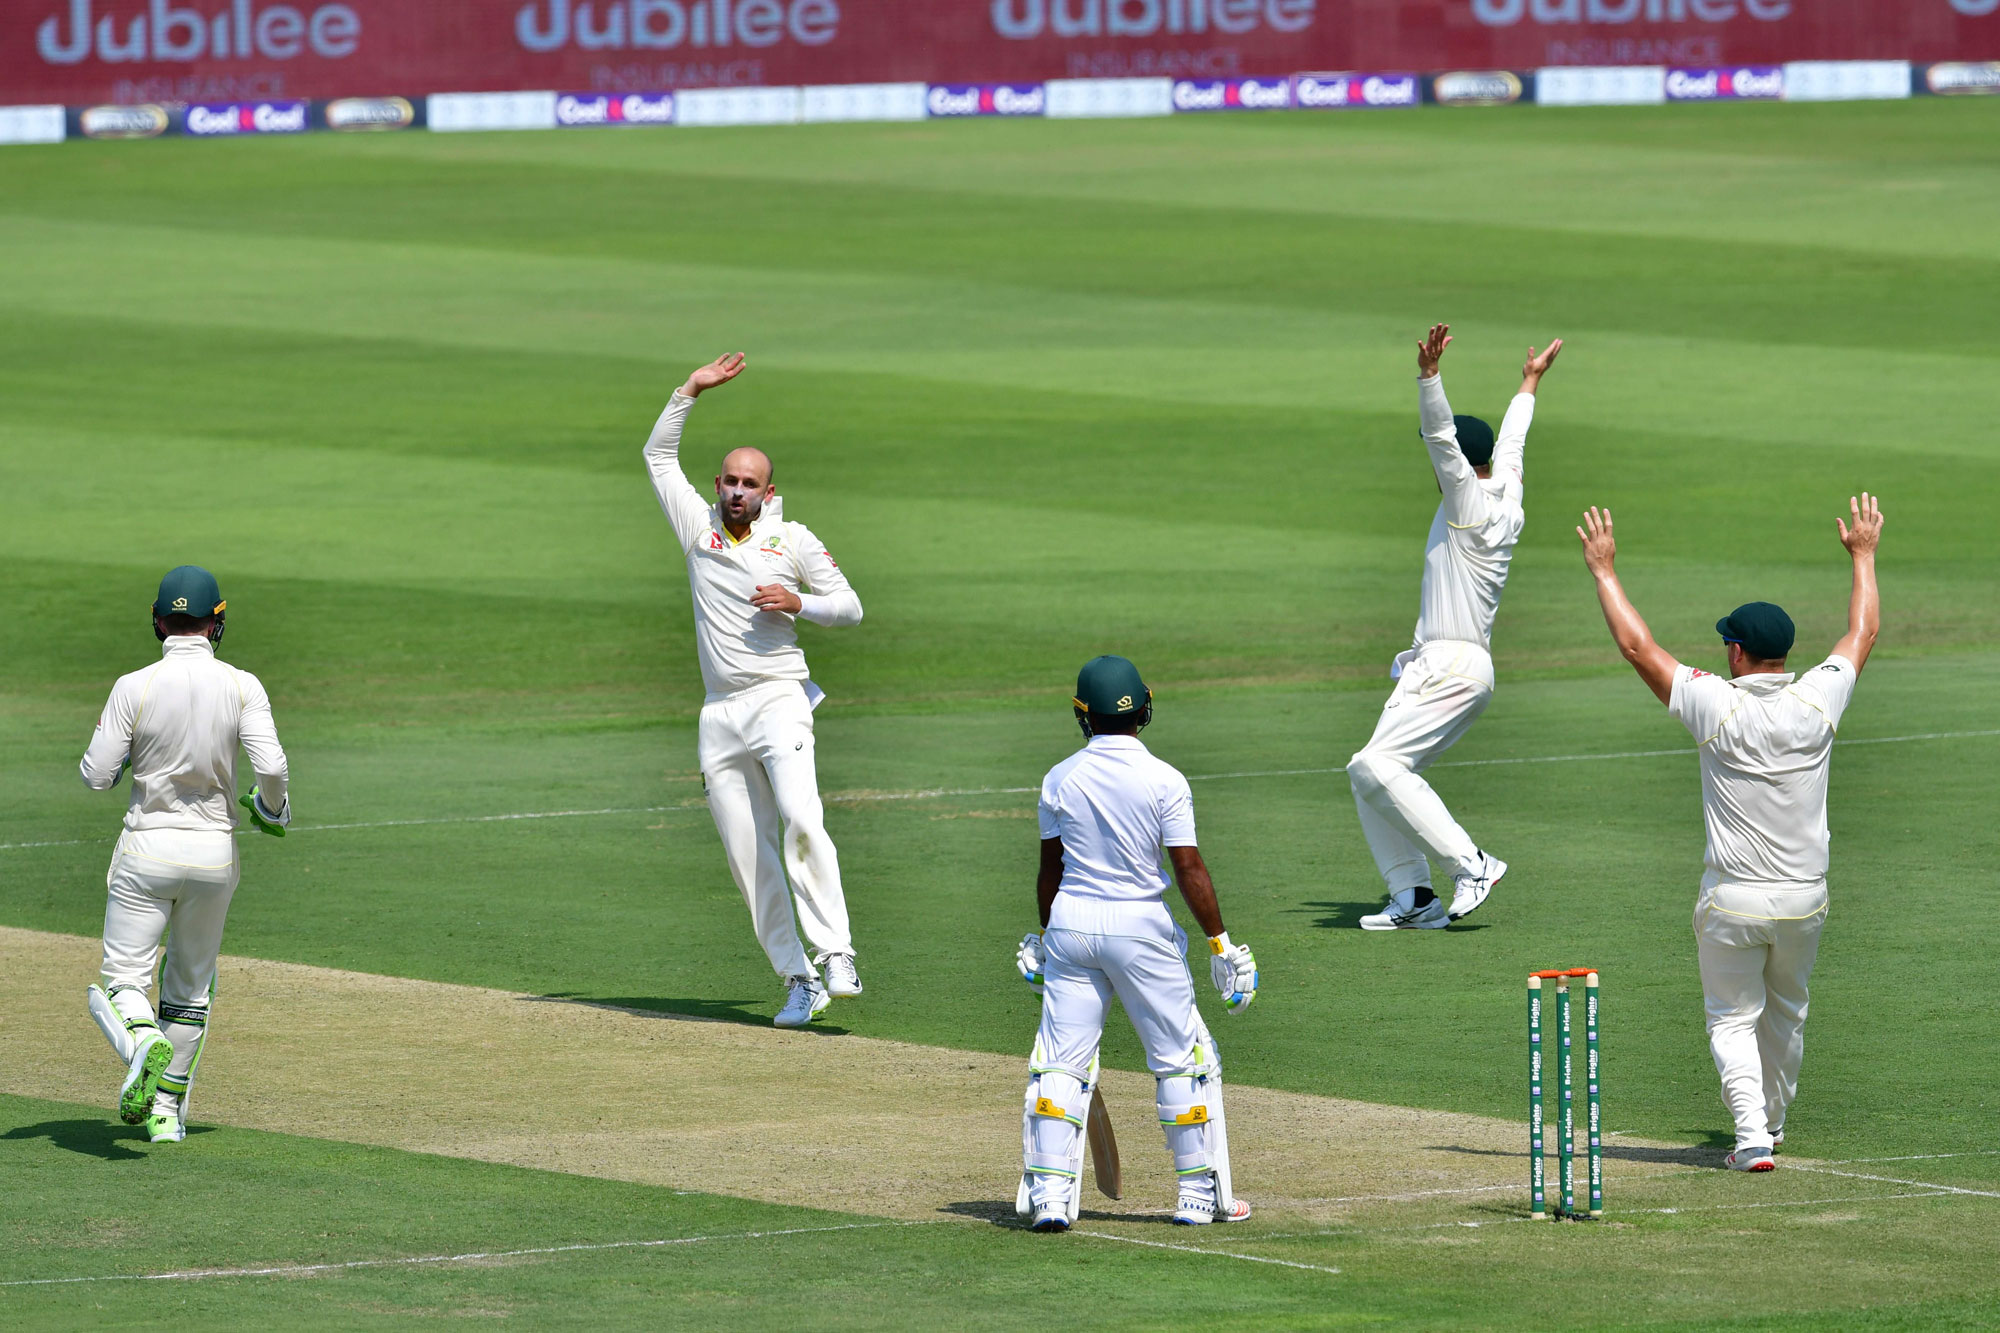 Australia cricketer Nathan Lyon (2nd L) celebrates after he dismissed Pakistan cricketer Asad Shafiq during day one of the second Test cricket match in the series between Australia and Pakistan at the Abu Dhabi Cricket Stadium in Abu Dhabi on October 16, 